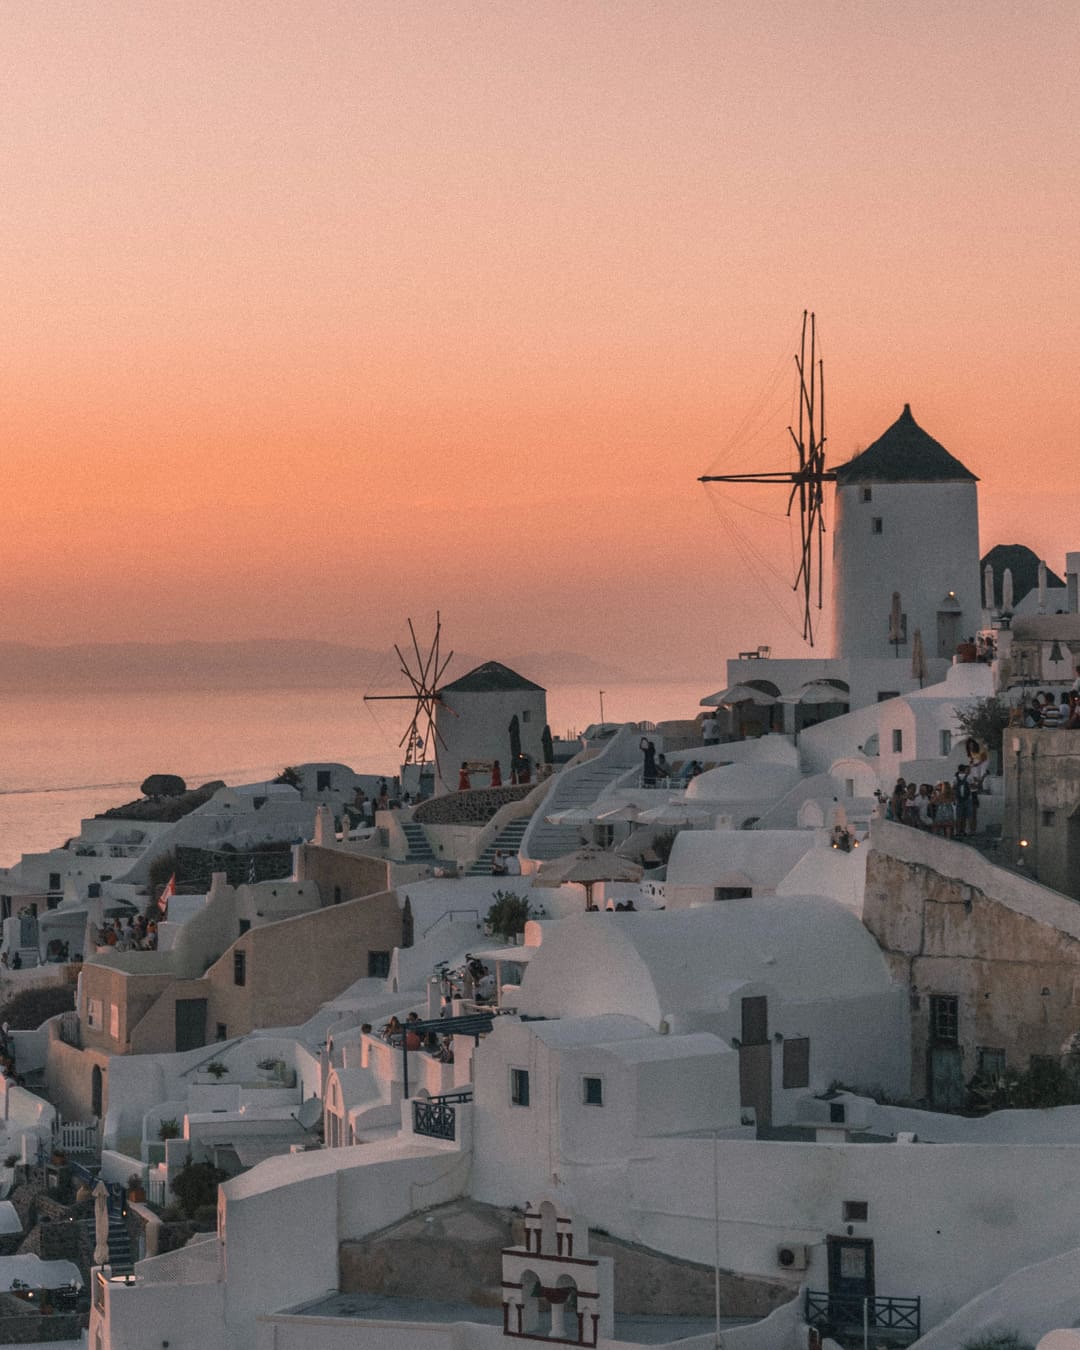 Overtourism in Europe | a peach sky above white buildings in Oia, Greece by Istvan Varro